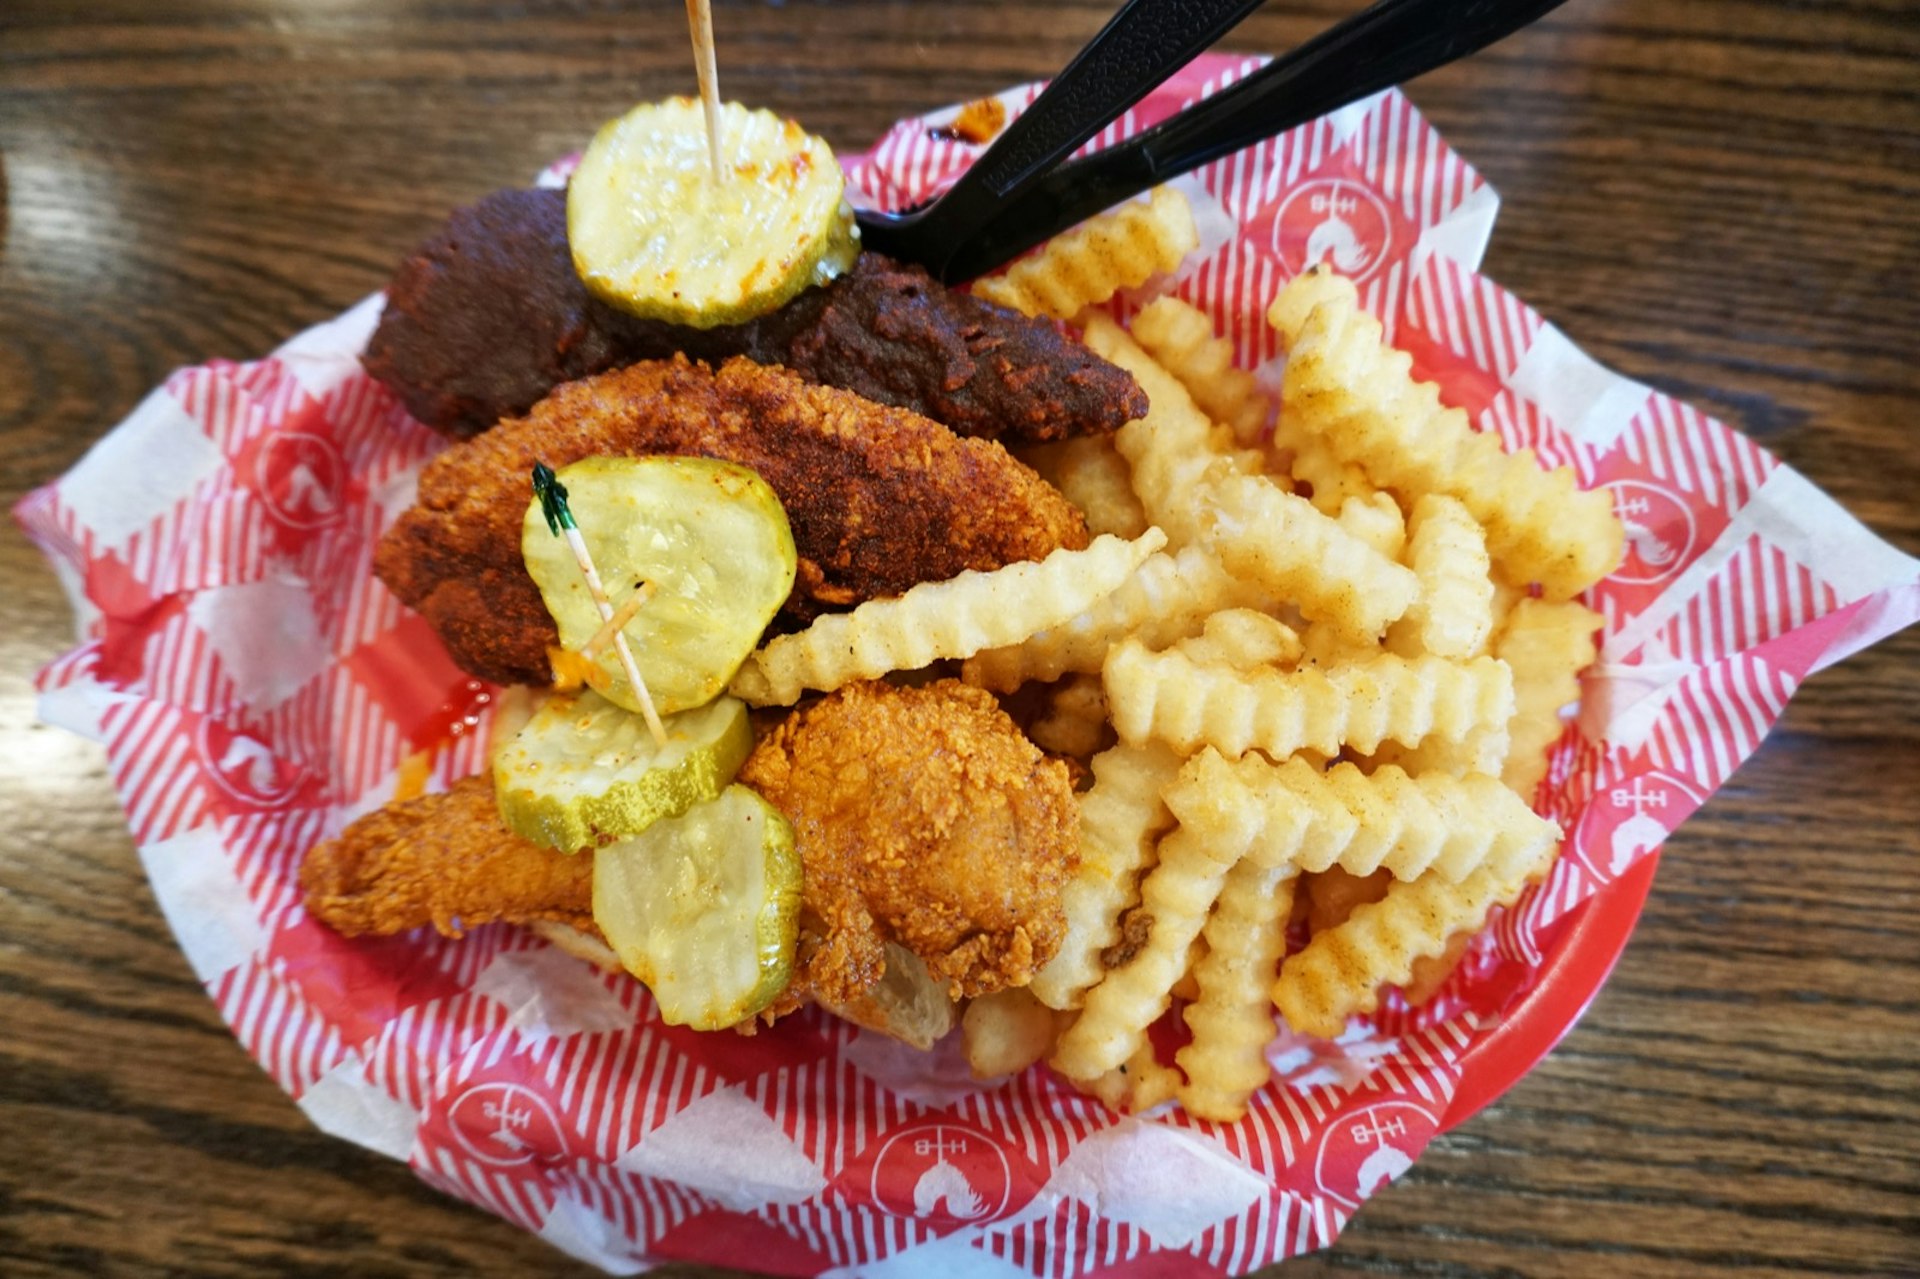 A photo of hot chicken tenders stabbed with toothpicks and pickles next to crinkled fries on top of red and white paper in a red bowl; weekend Nashville 